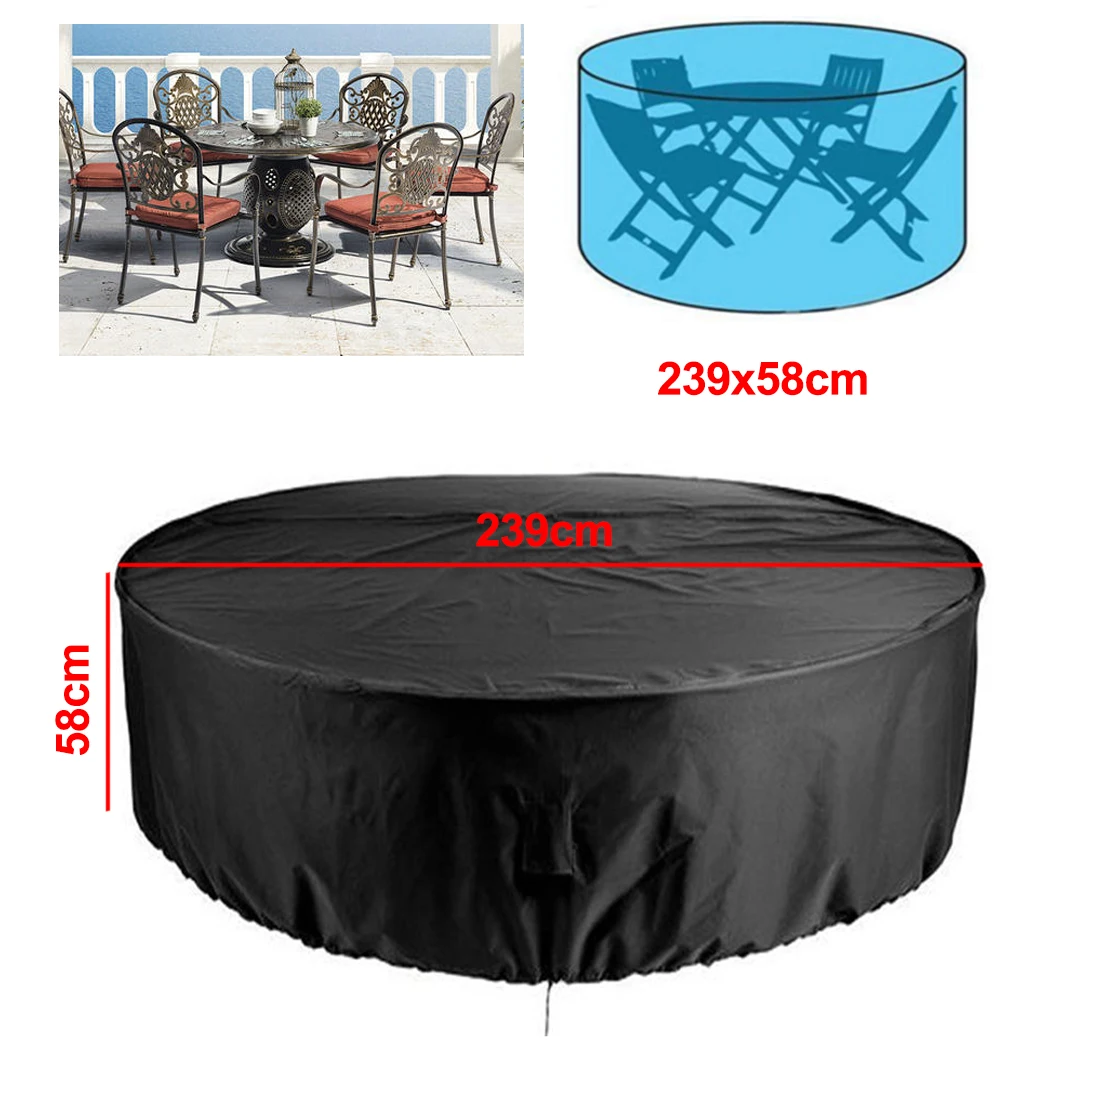 New Round Table Chair Set Protect Cover Outdoor Furniture Patio Waterproof Cloth 